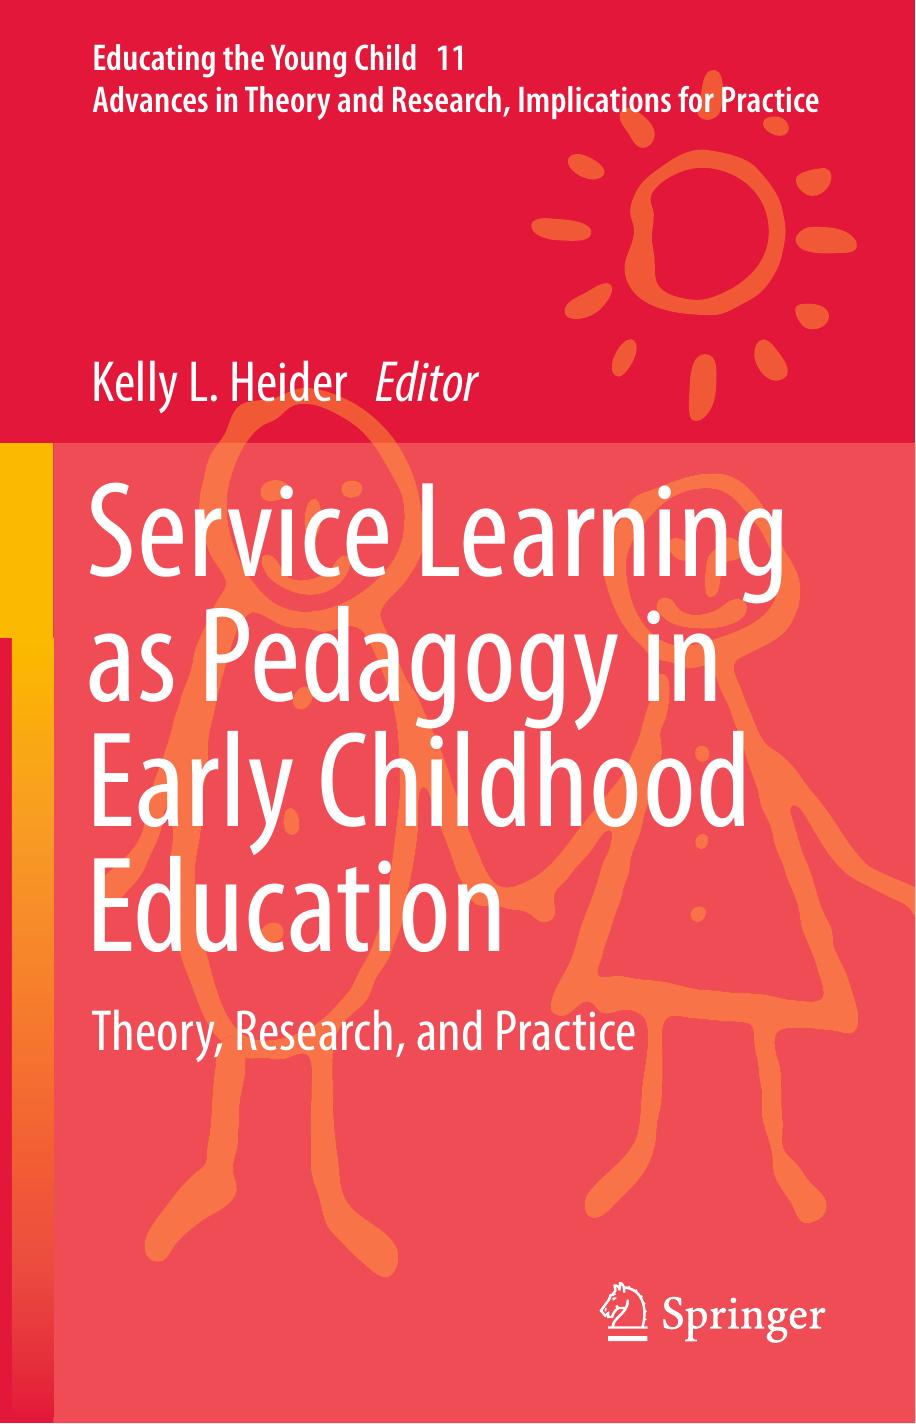 Service Learning as Pedagogy in Early Childhood Education  Theory, Research, and Practice 2017.pdf